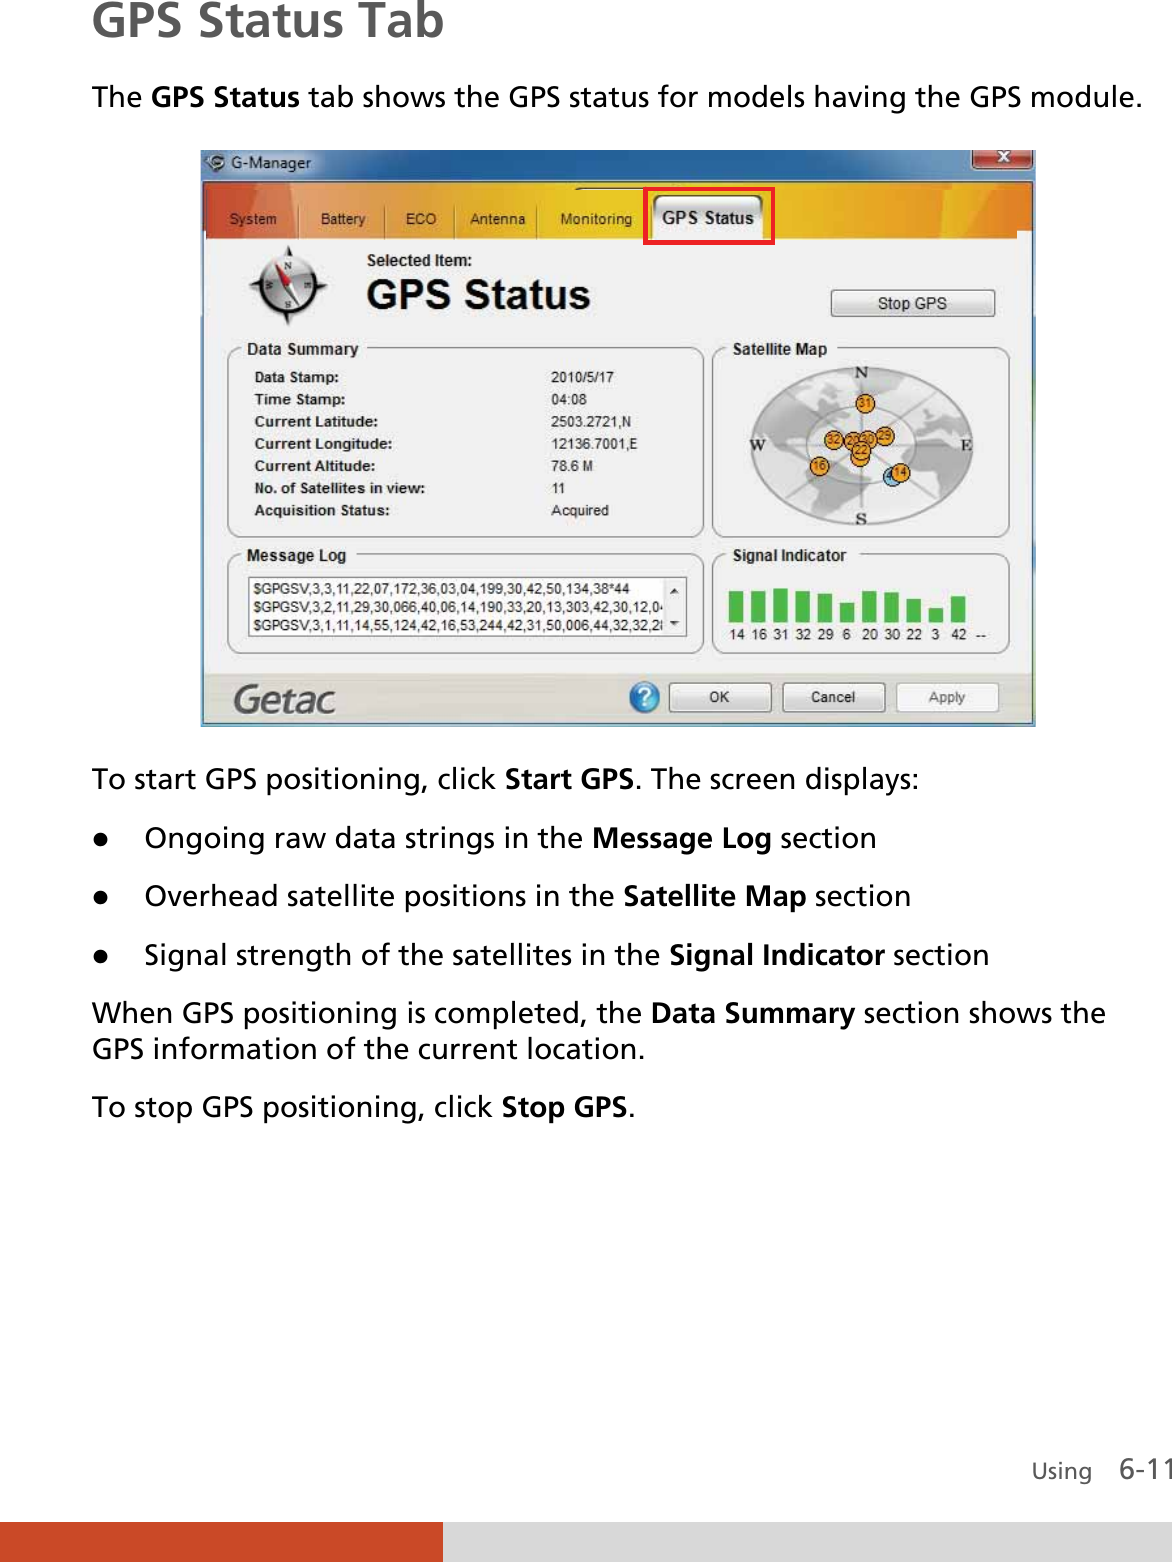  Using    6-11 GPS Status Tab The GPS Status tab shows the GPS status for models having the GPS module.  To start GPS positioning, click Start GPS. The screen displays: z Ongoing raw data strings in the Message Log section z Overhead satellite positions in the Satellite Map section z Signal strength of the satellites in the Signal Indicator section  When GPS positioning is completed, the Data Summary section shows the GPS information of the current location. To stop GPS positioning, click Stop GPS.     